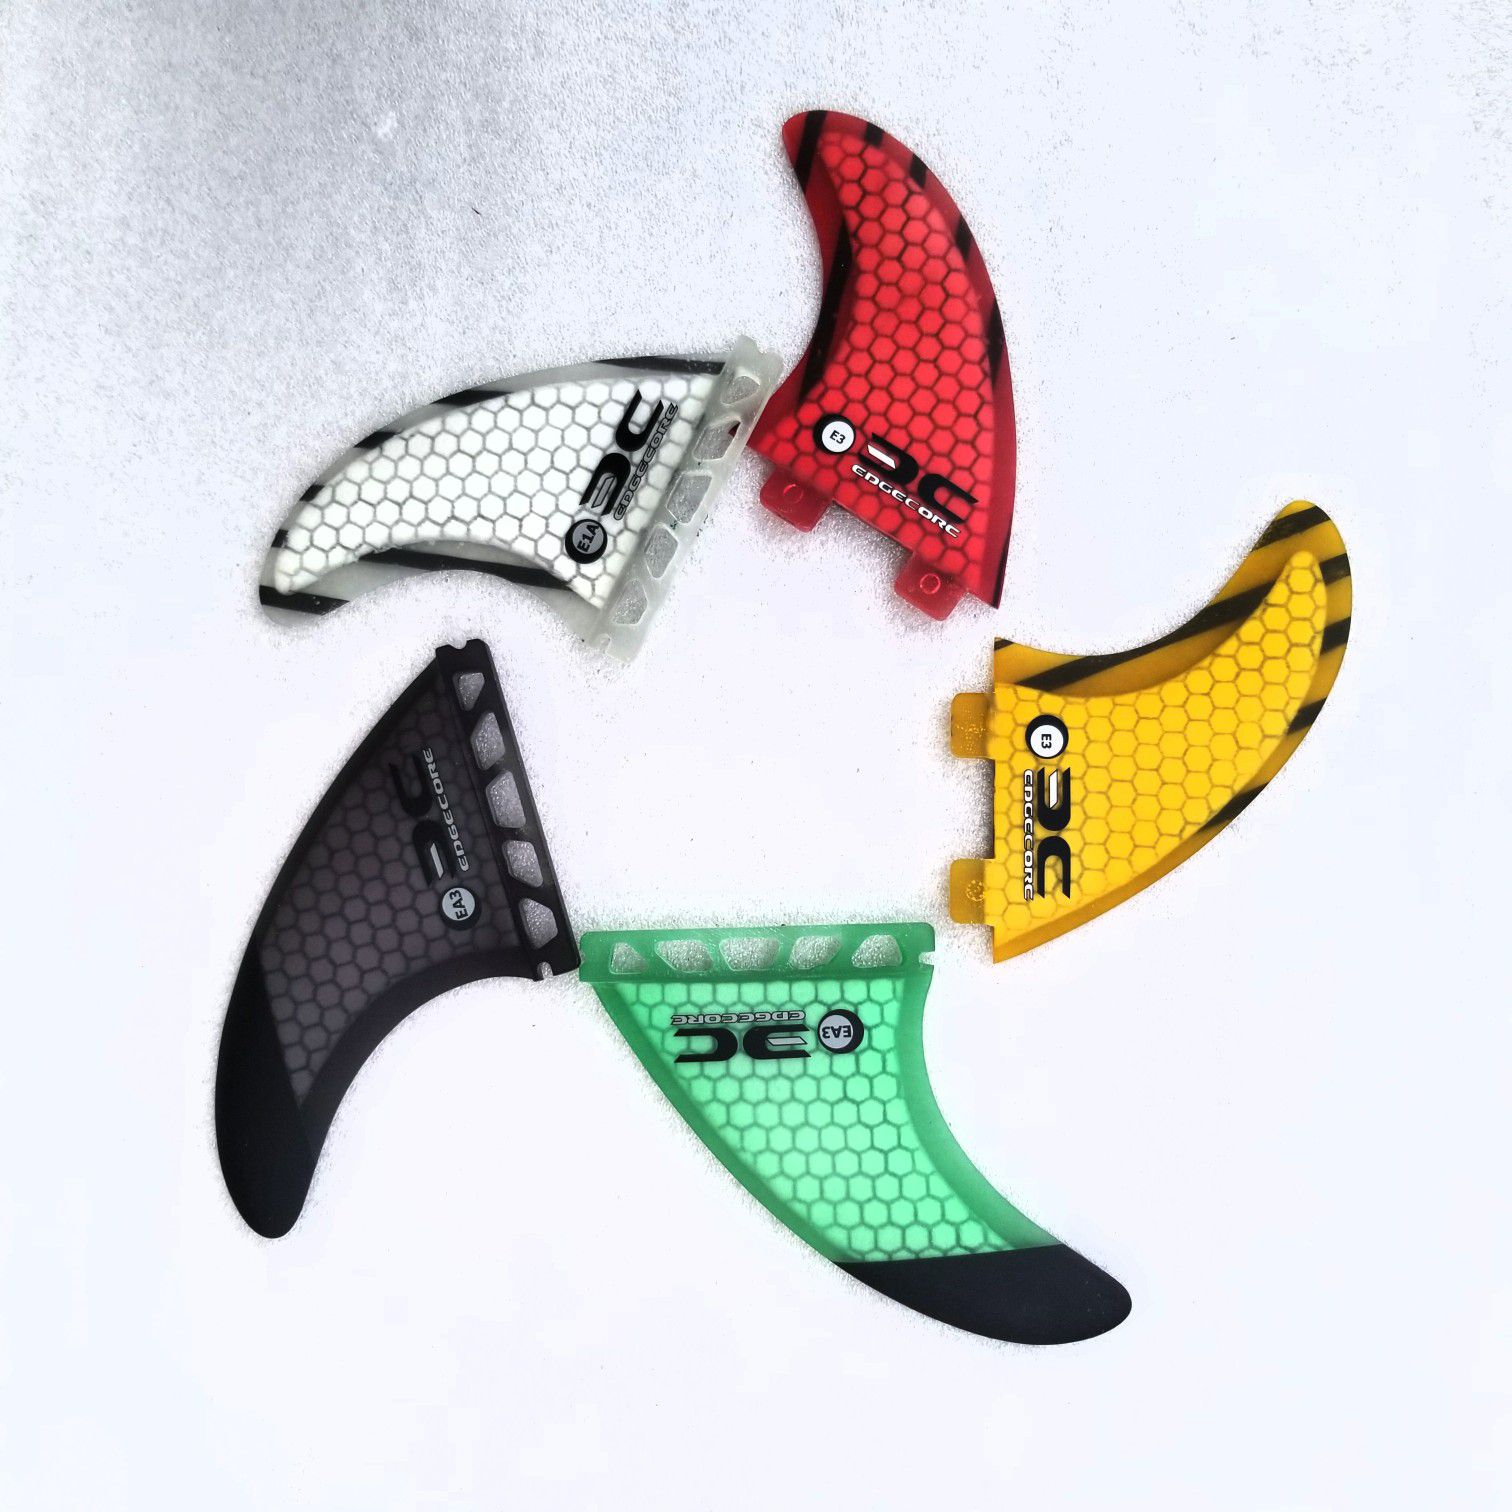 🔅🔅🔅SURFBOARD FINS BY EDGECORE FACTORY DIRECT🎆🎆🎆